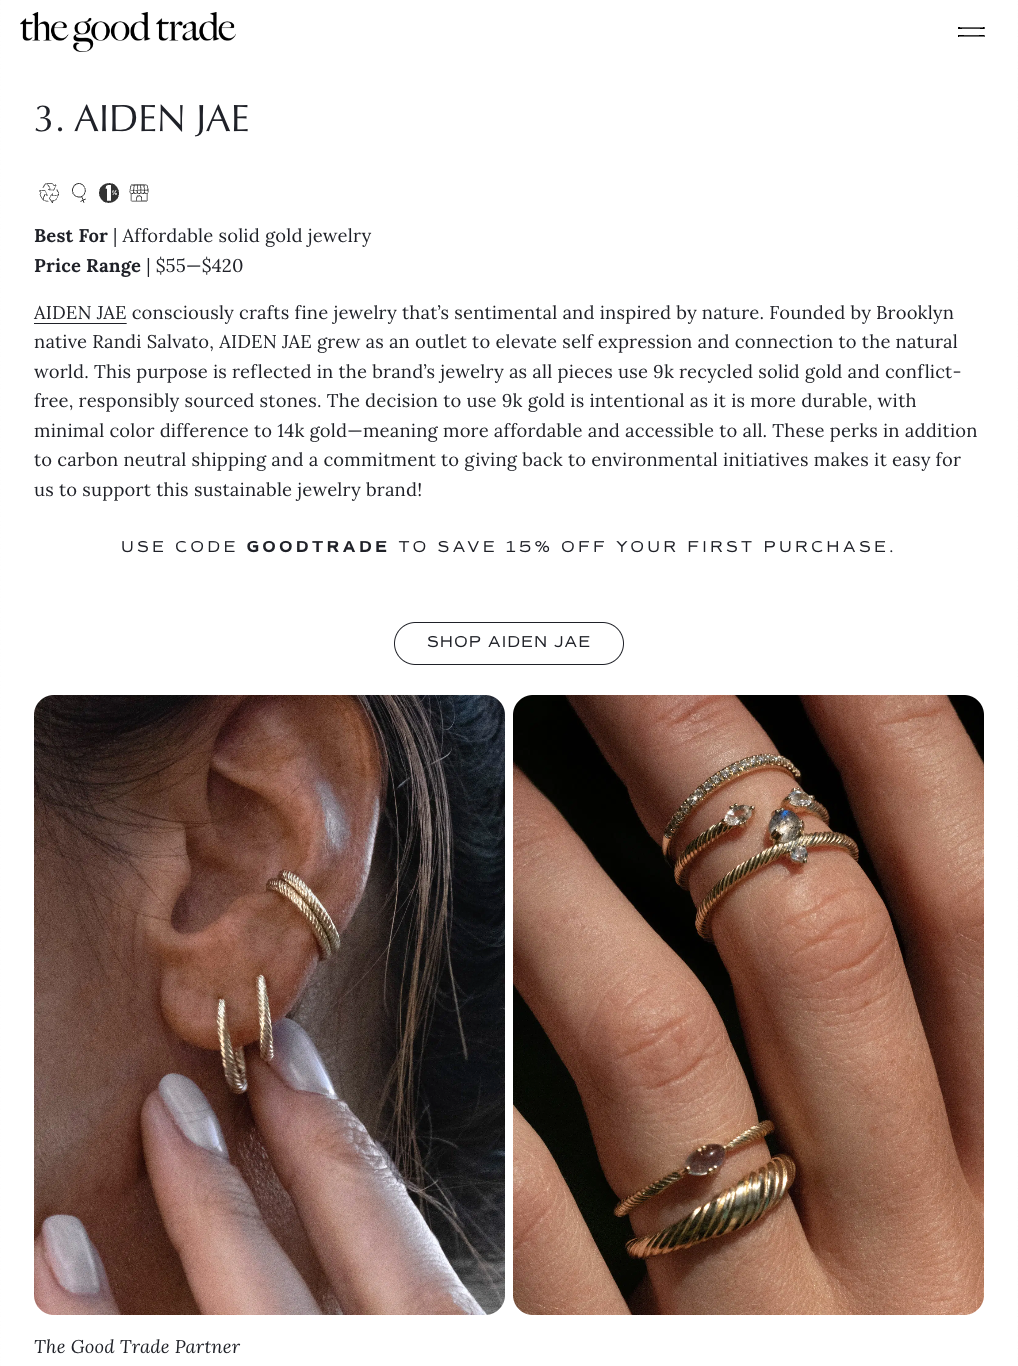 Aiden Jae is #3 on The Good Trade's recommended list of Best Minimalist Jewelry Brands.